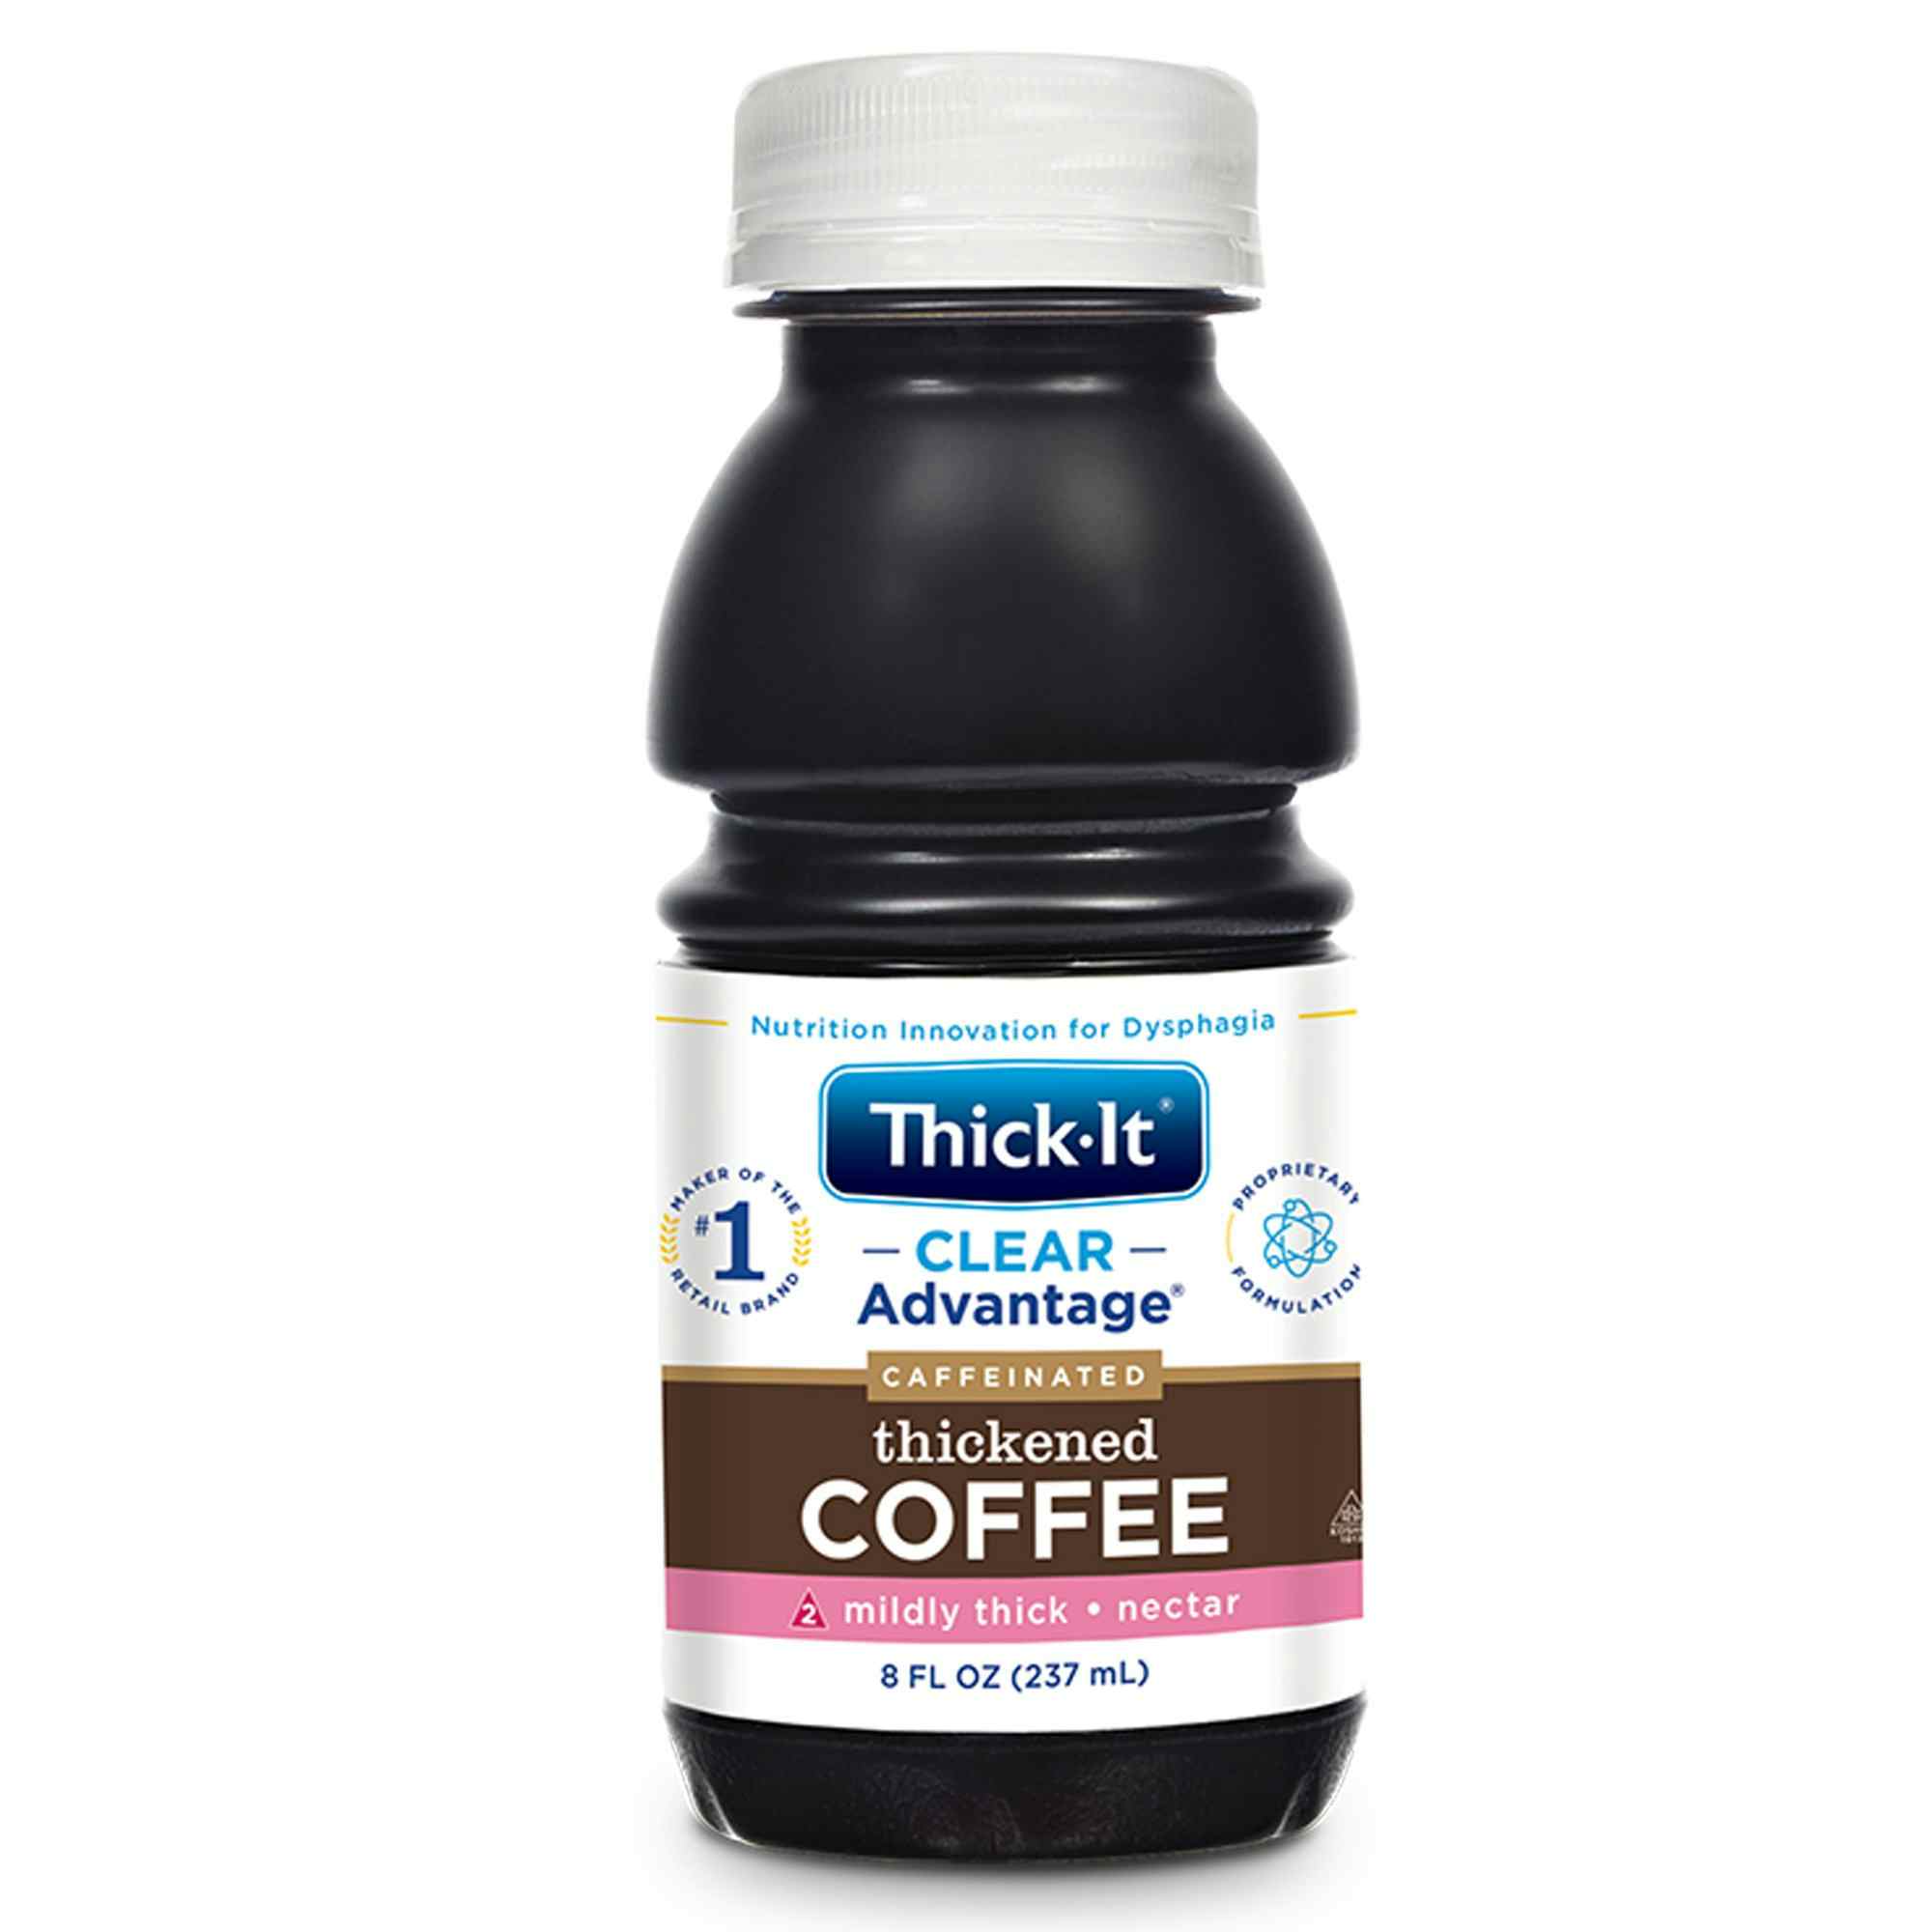 Thick-It Clear Advantage Caffeinated Thickened Coffee, Mildly Thick, Nectar Consistency, B467-L9044, Case of 24